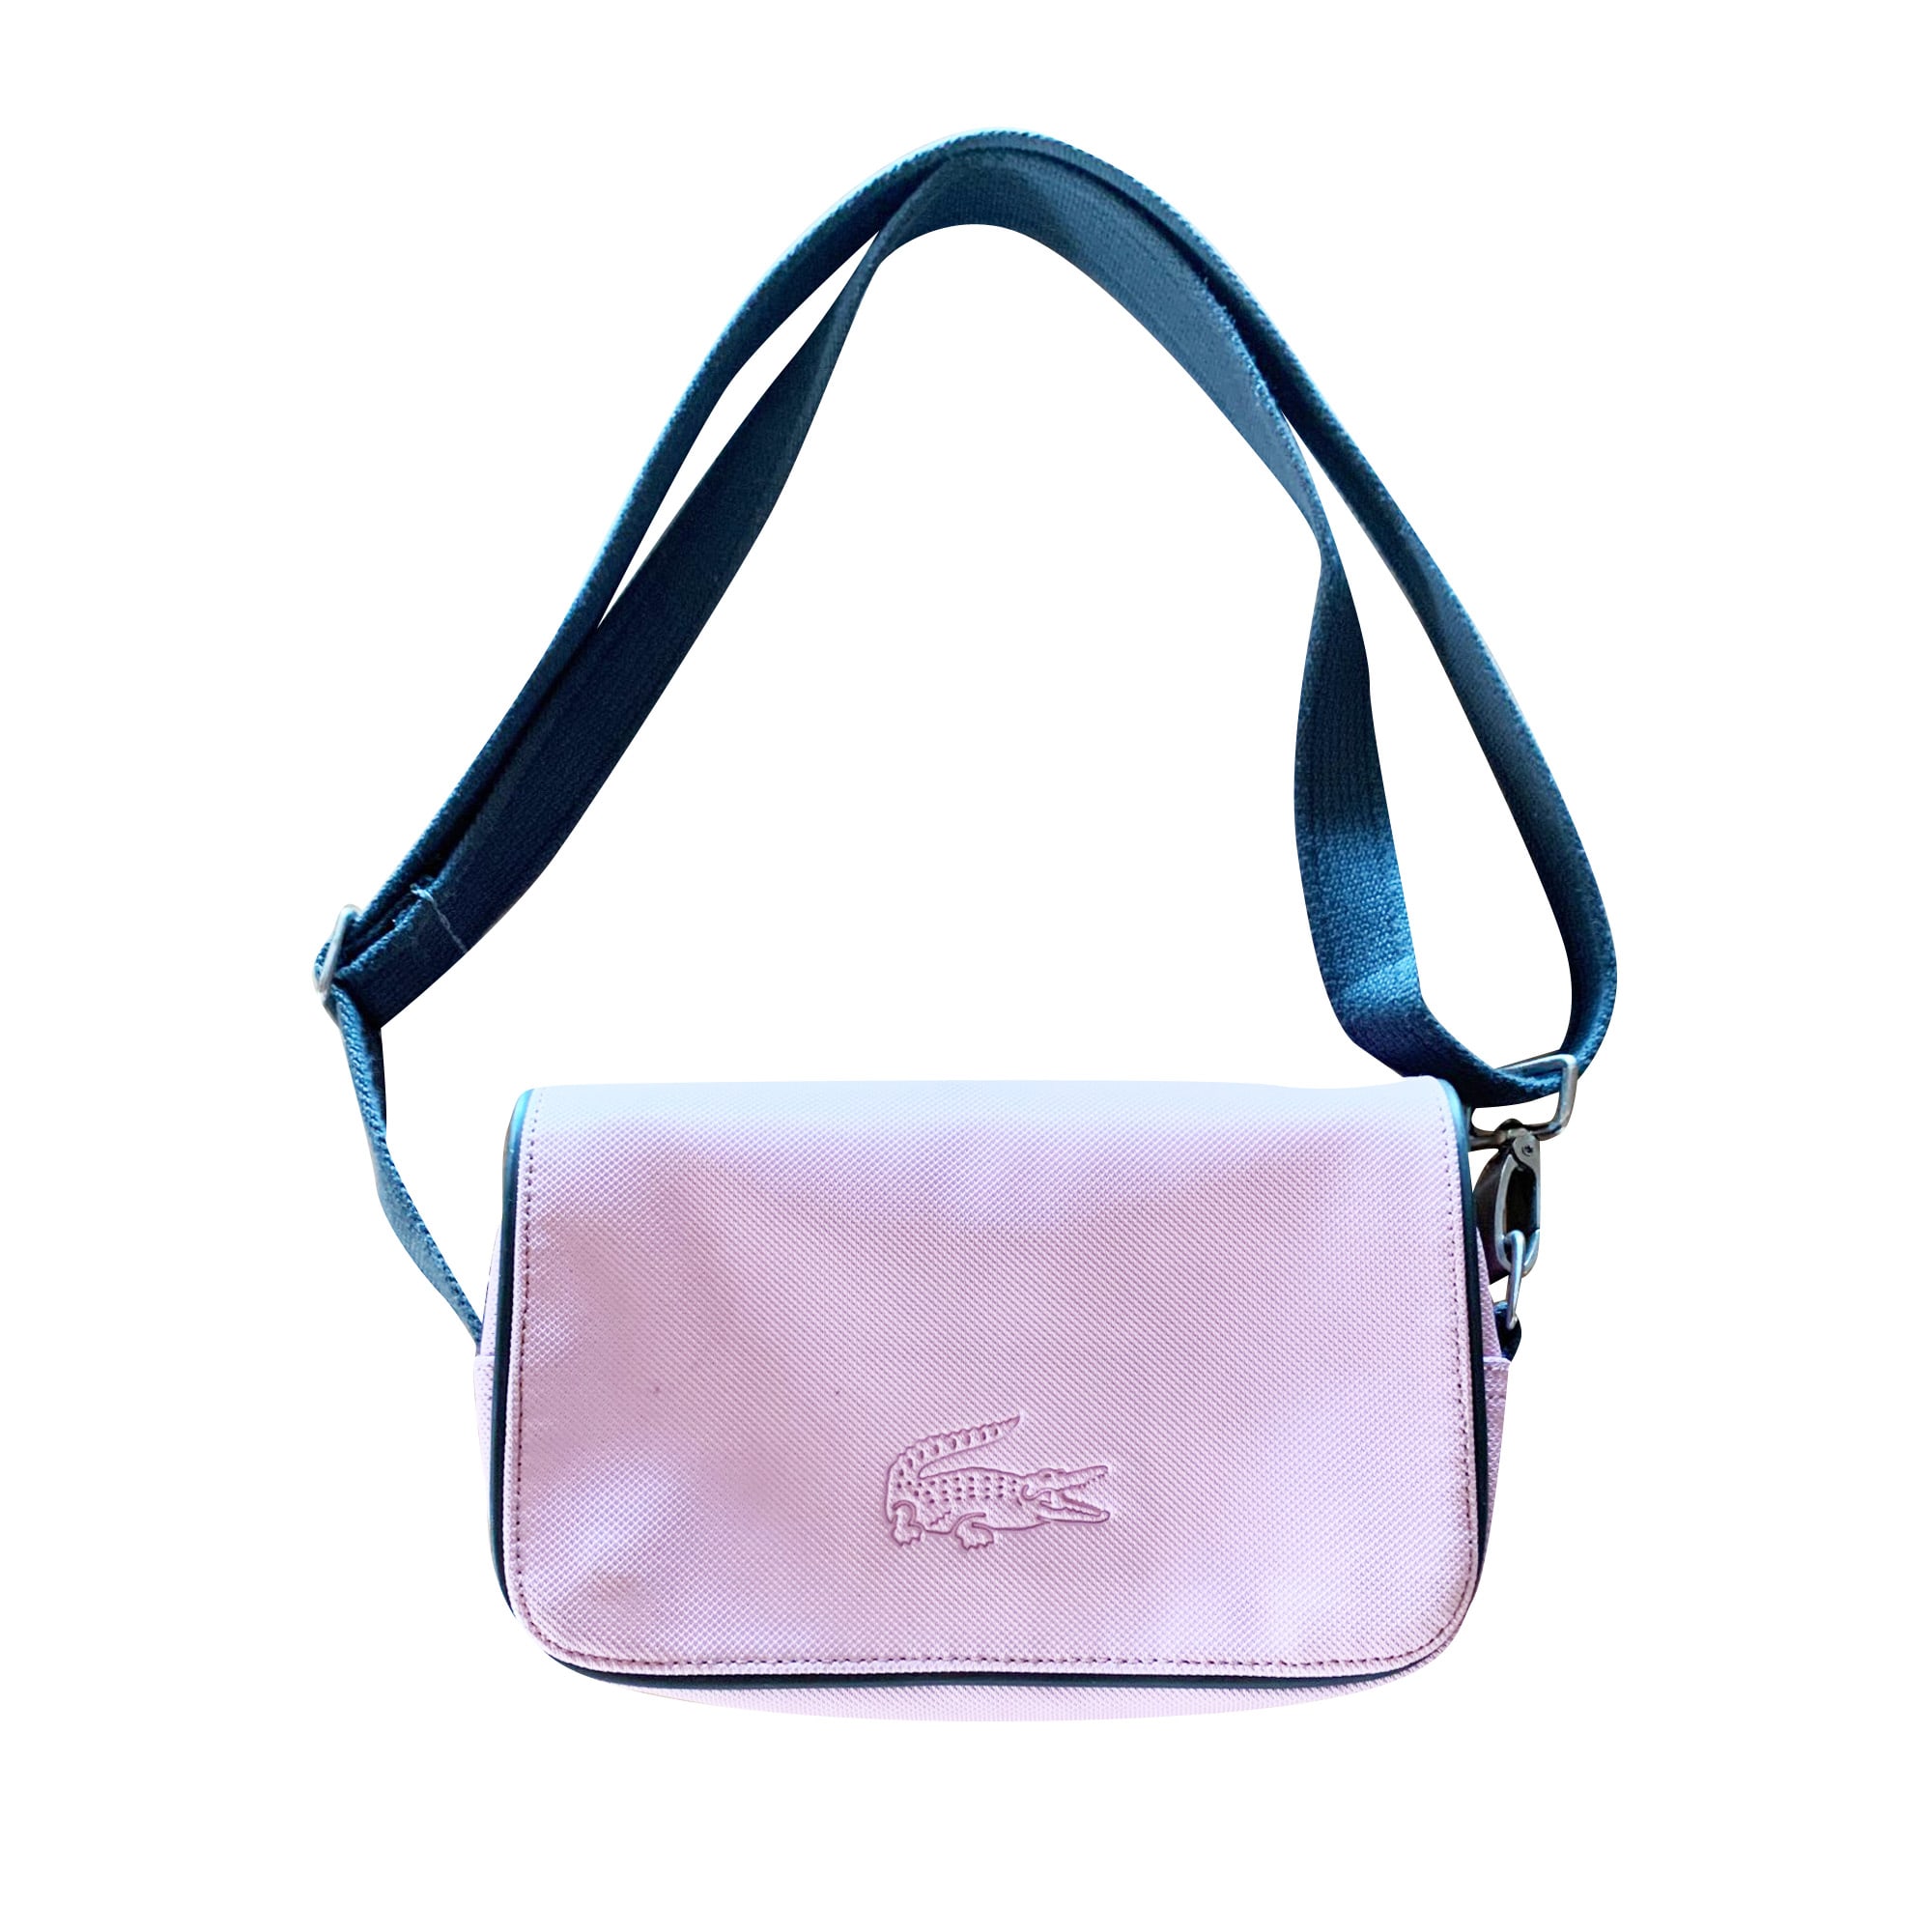 sac lacoste bandouliere rose